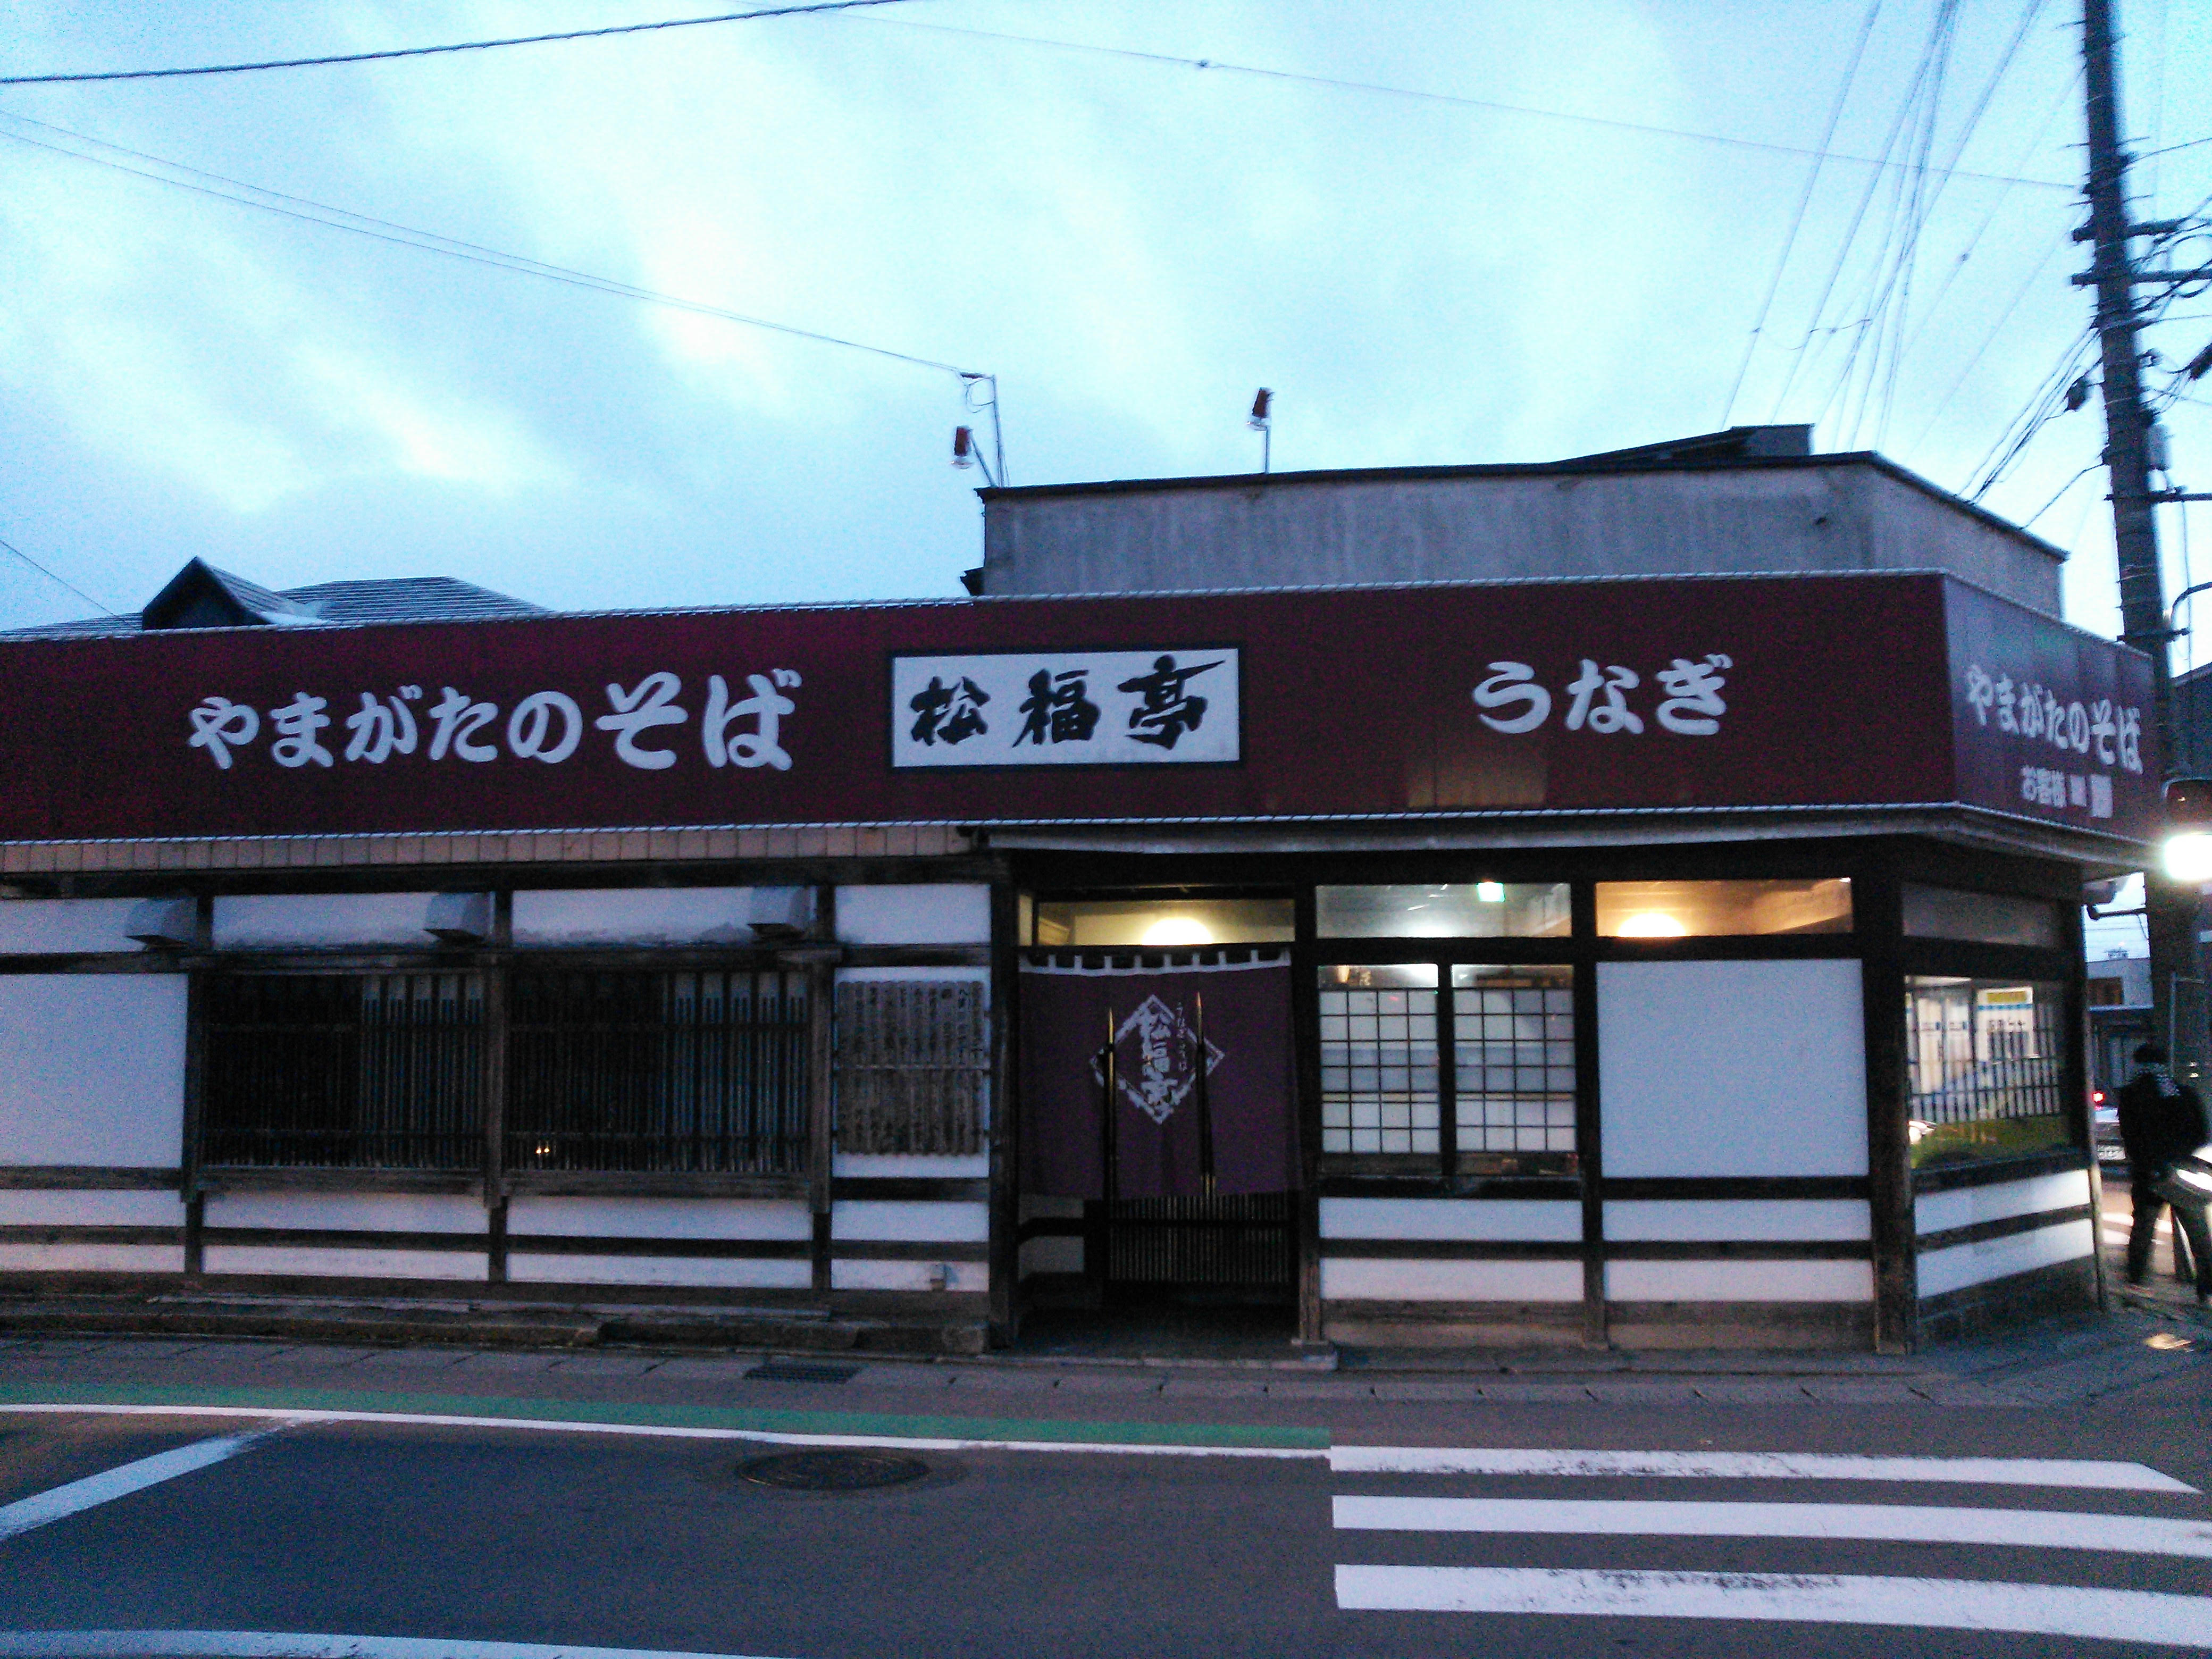 Probably the best Soba restaurant in Tohoku!!!